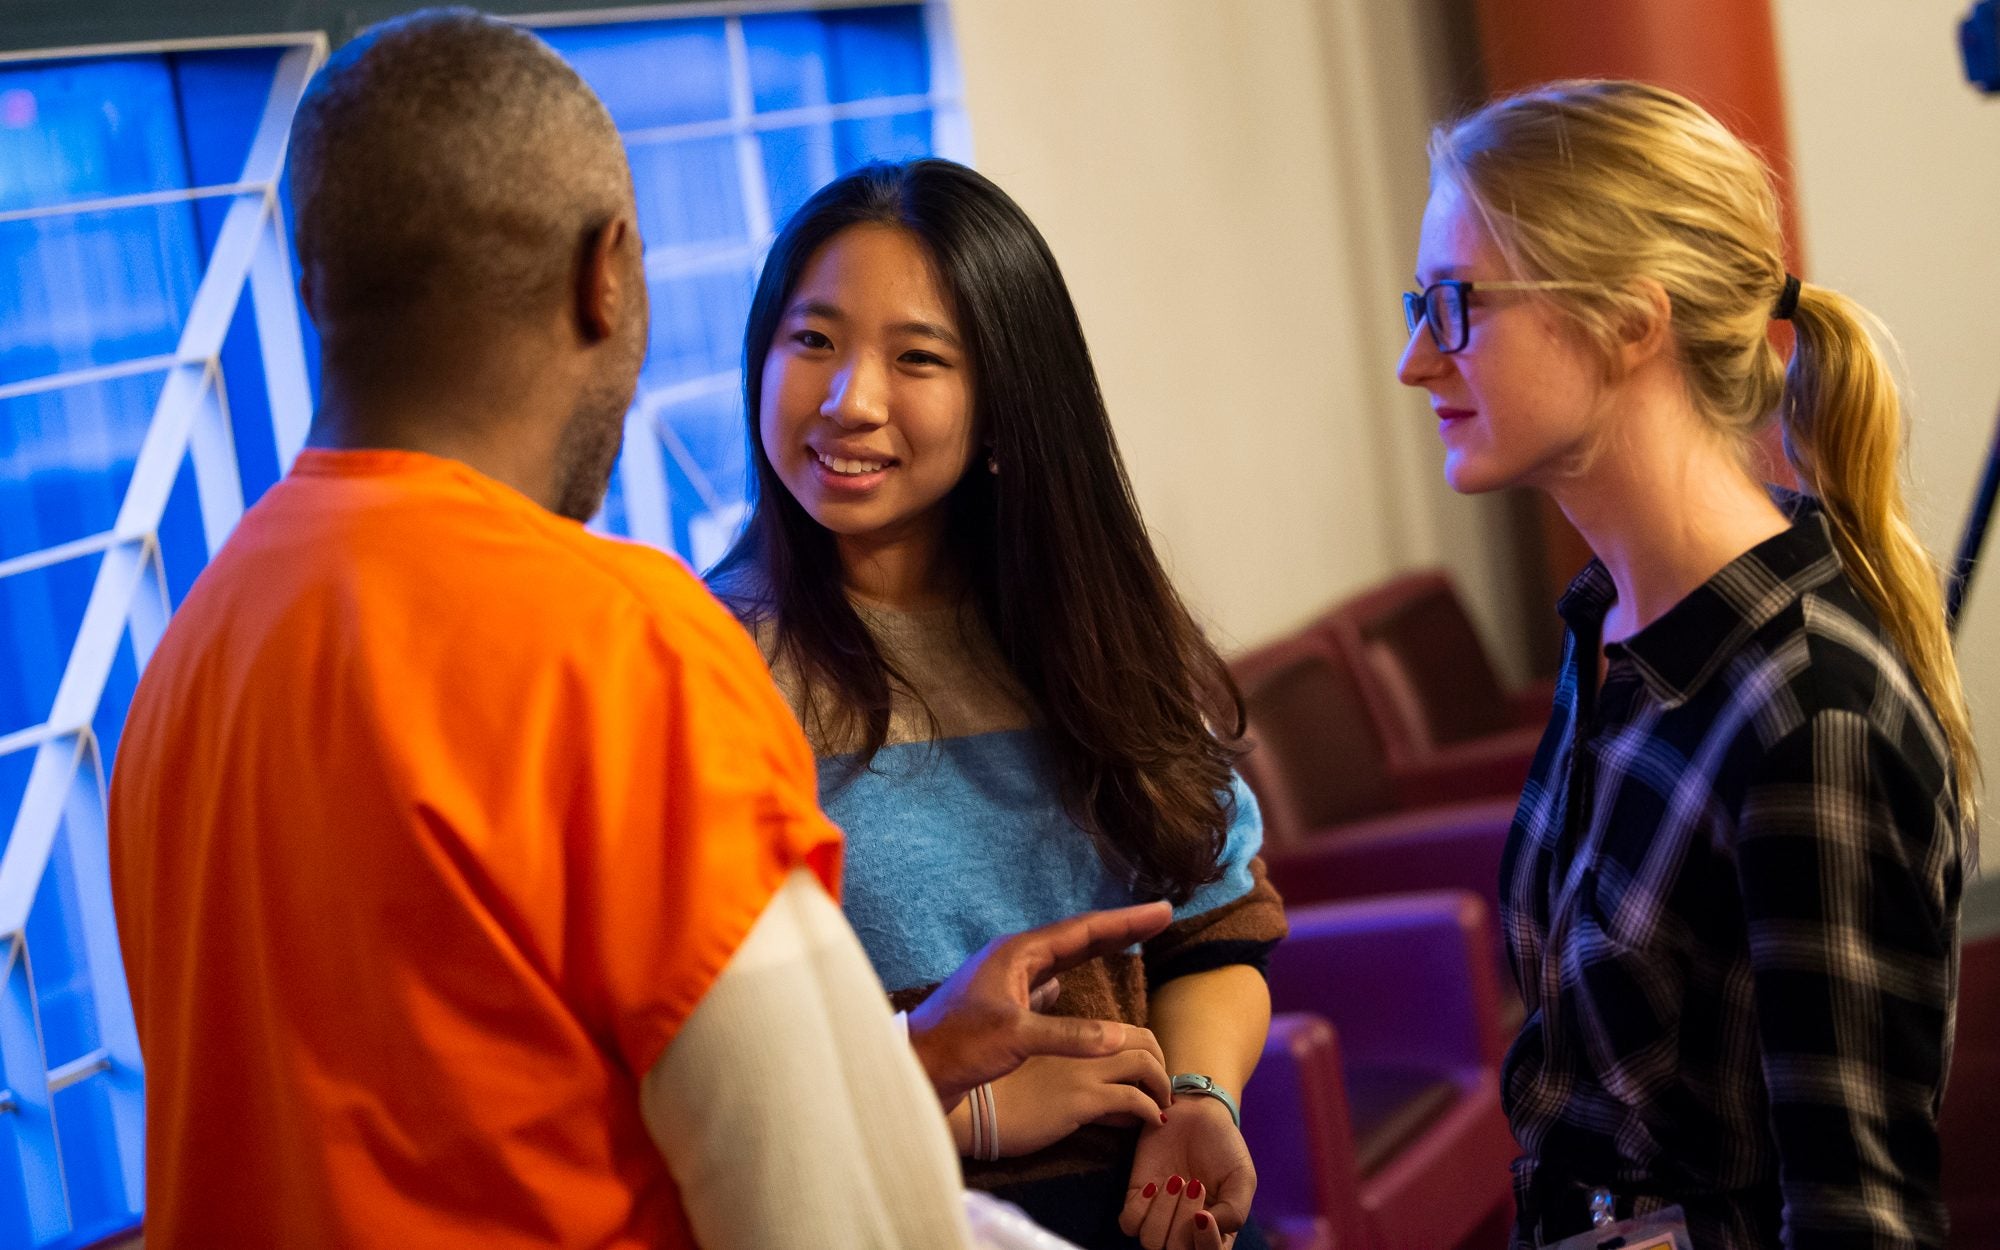 Two young women speak with an incarcerated man.